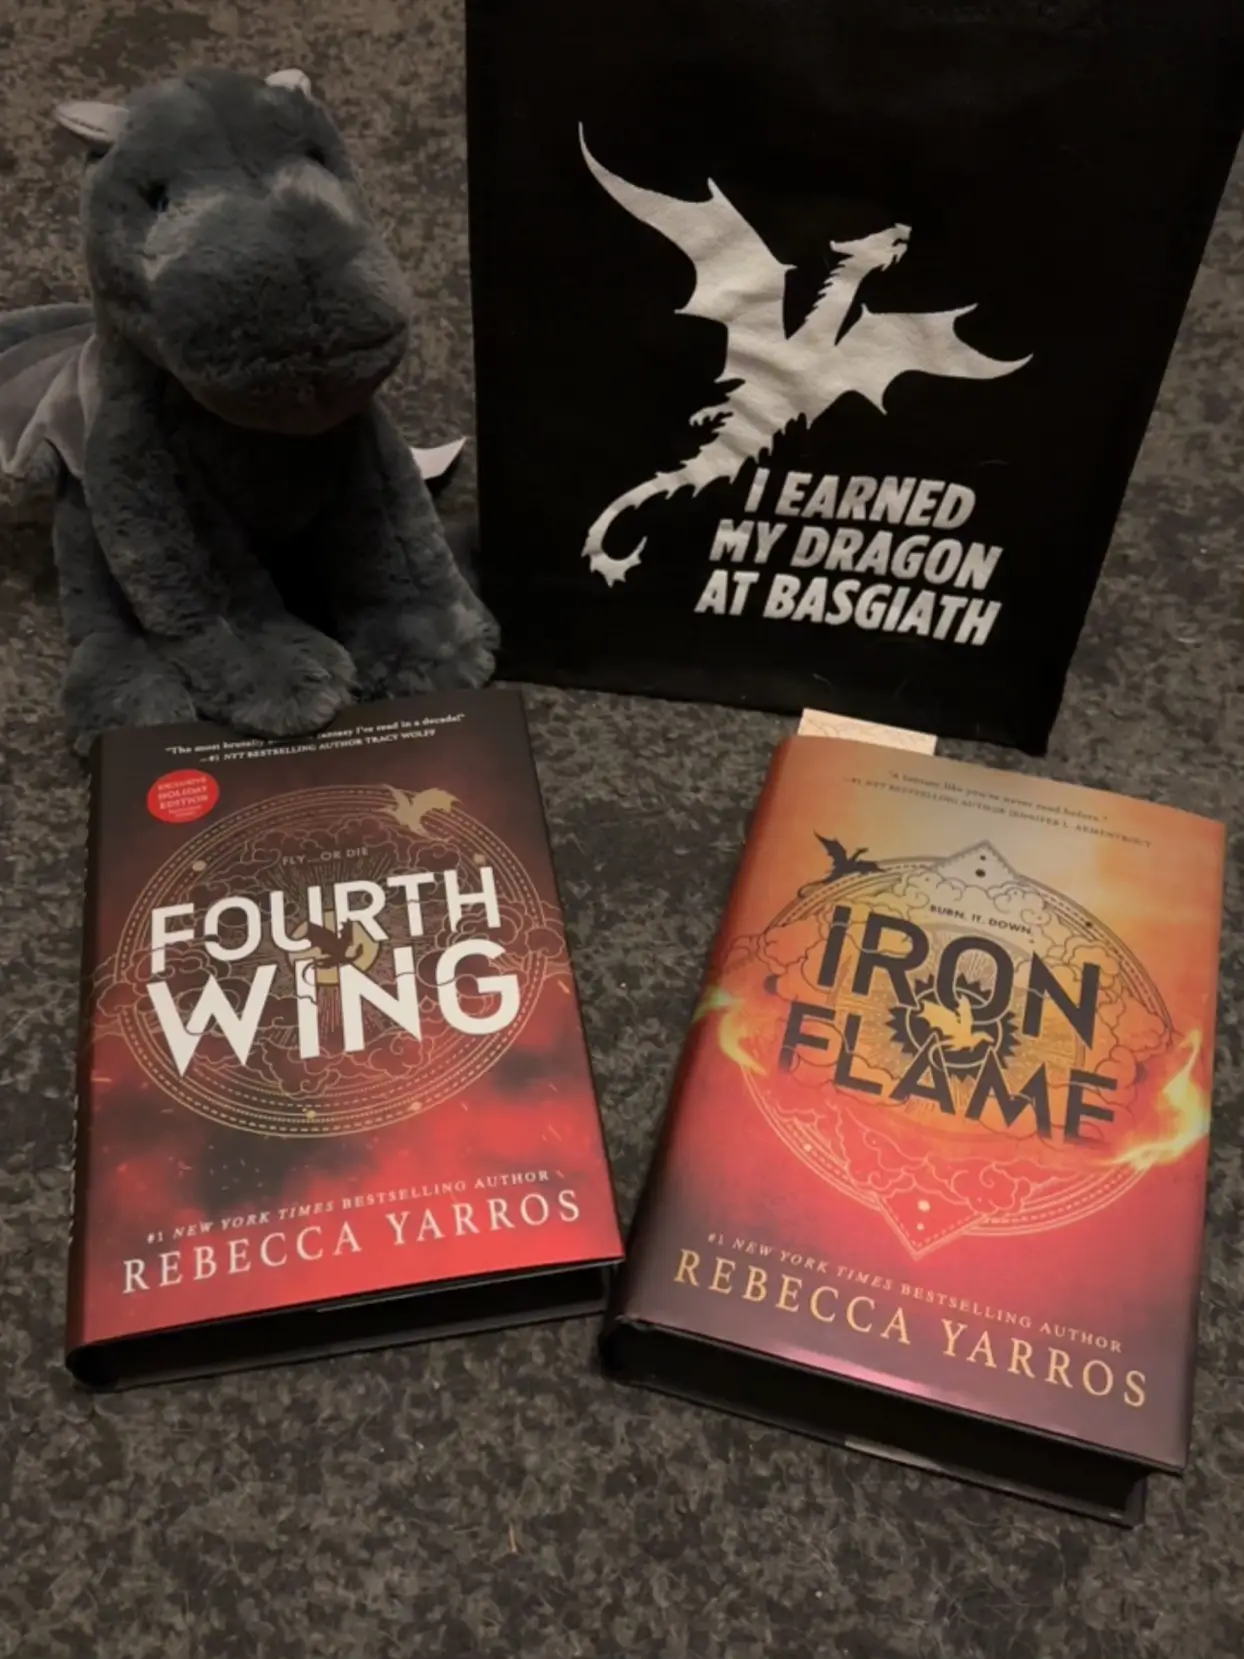 Books for Fans of 'Fourth Wing' and 'Iron Flame